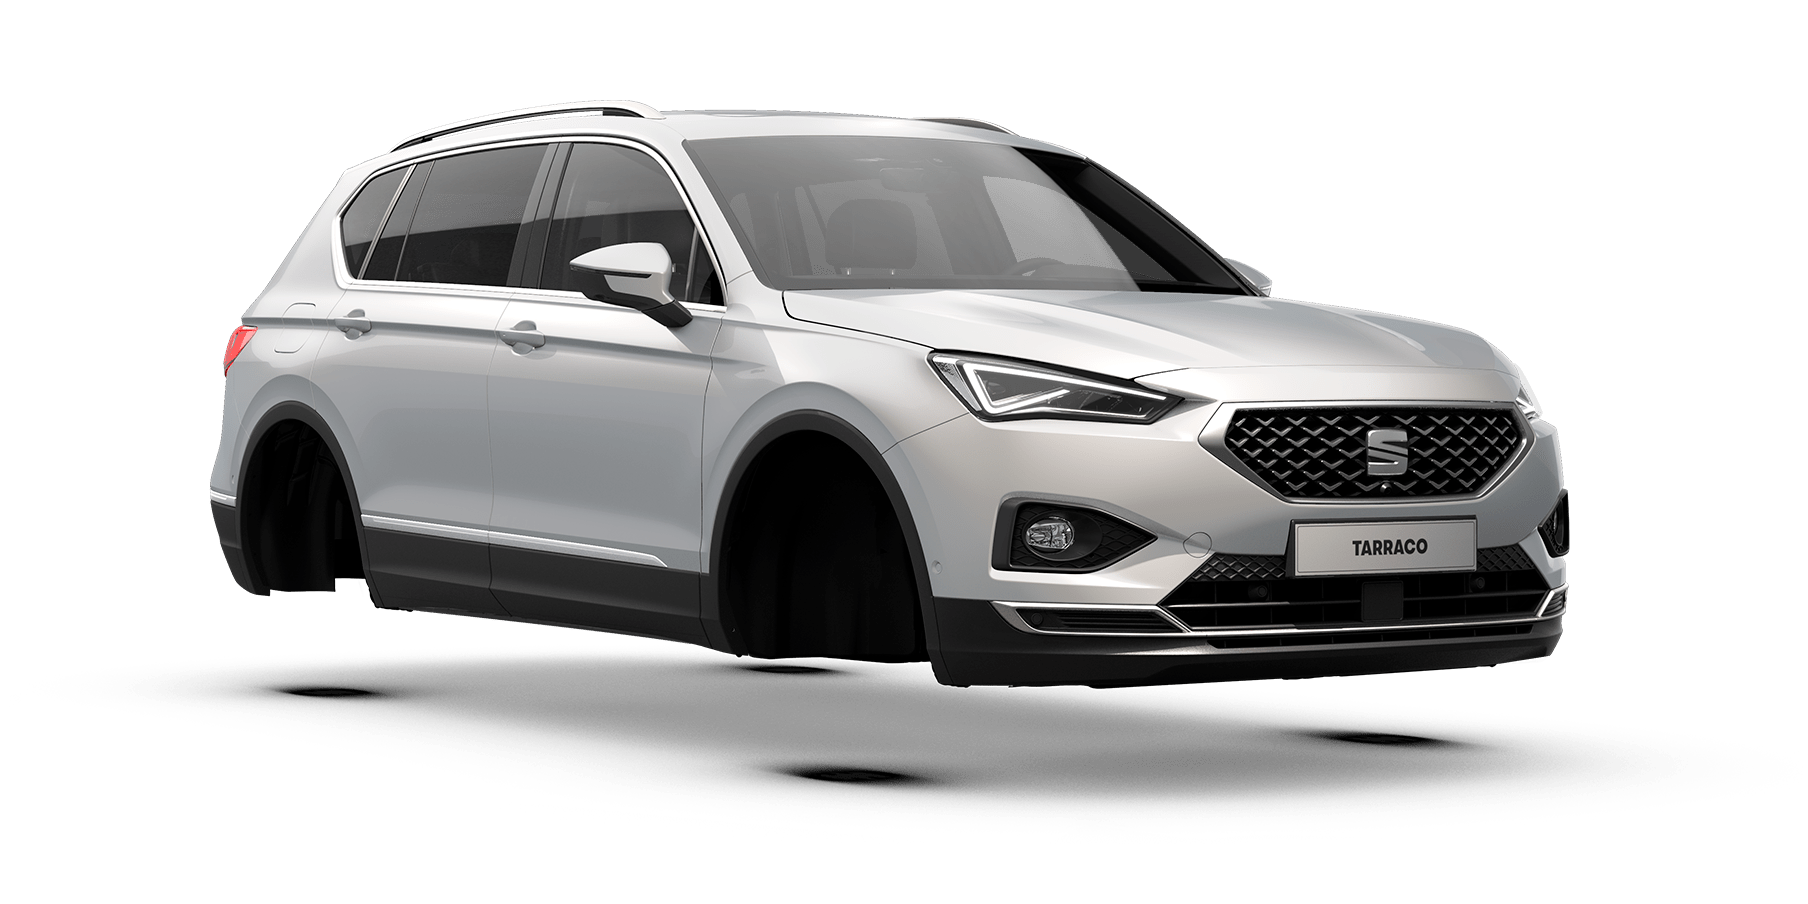 New SEAT Tarraco XPERIENCE in Oryx White colour